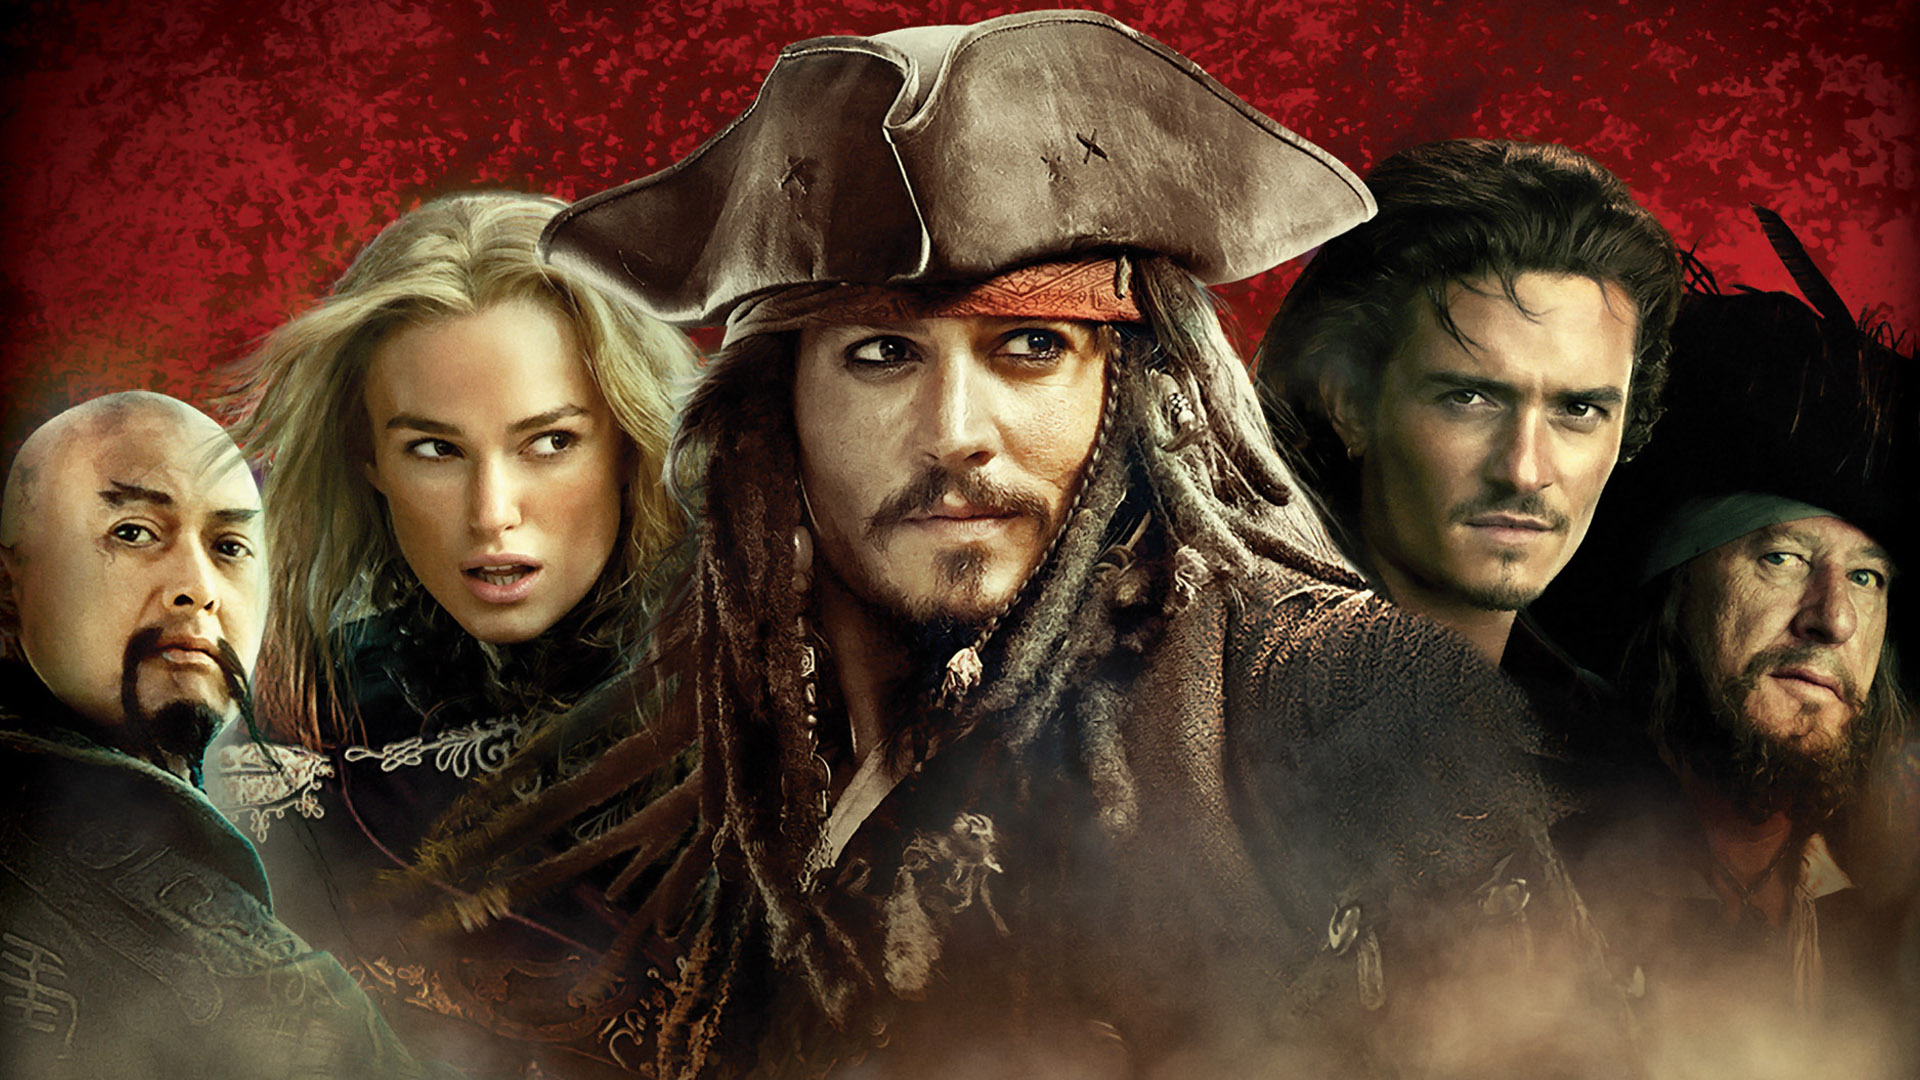 jack sparrow, geoffrey rush, movie, pirates of the caribbean: at world's end, captain sao feng, chow yun fat, elizabeth swann, hector barbossa, johnny depp, keira knightley, orlando bloom, will turner, pirates of the caribbean